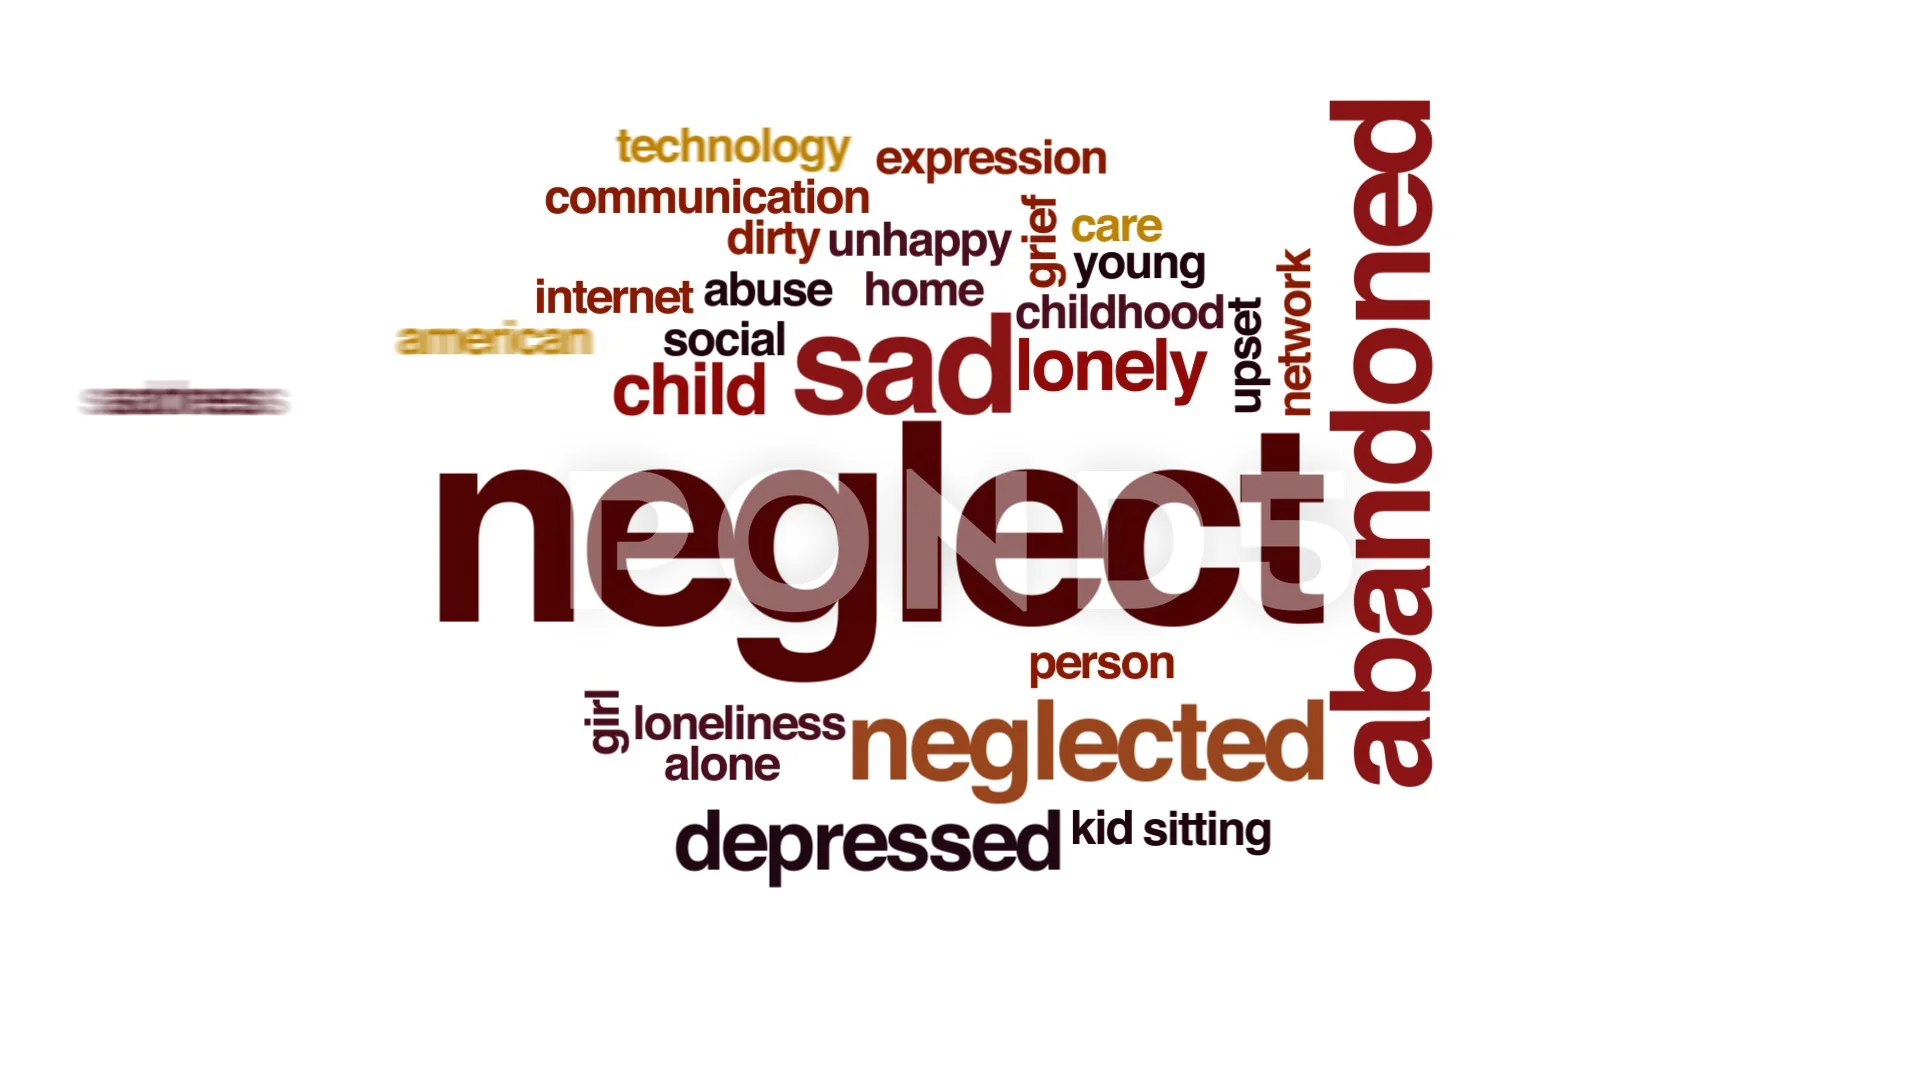 the word neglect